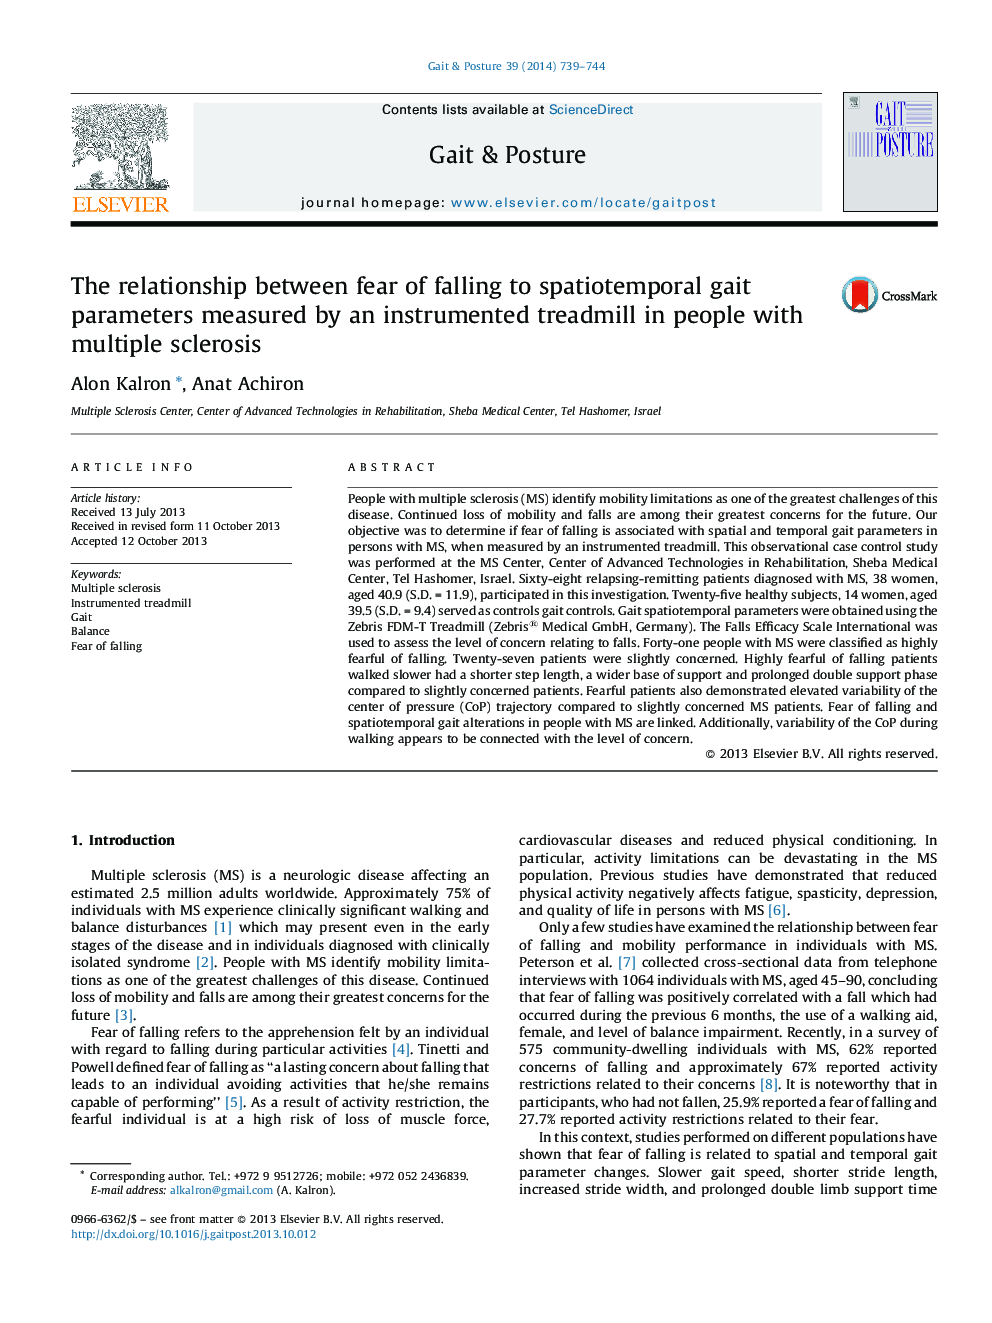 The relationship between fear of falling to spatiotemporal gait parameters measured by an instrumented treadmill in people with multiple sclerosis